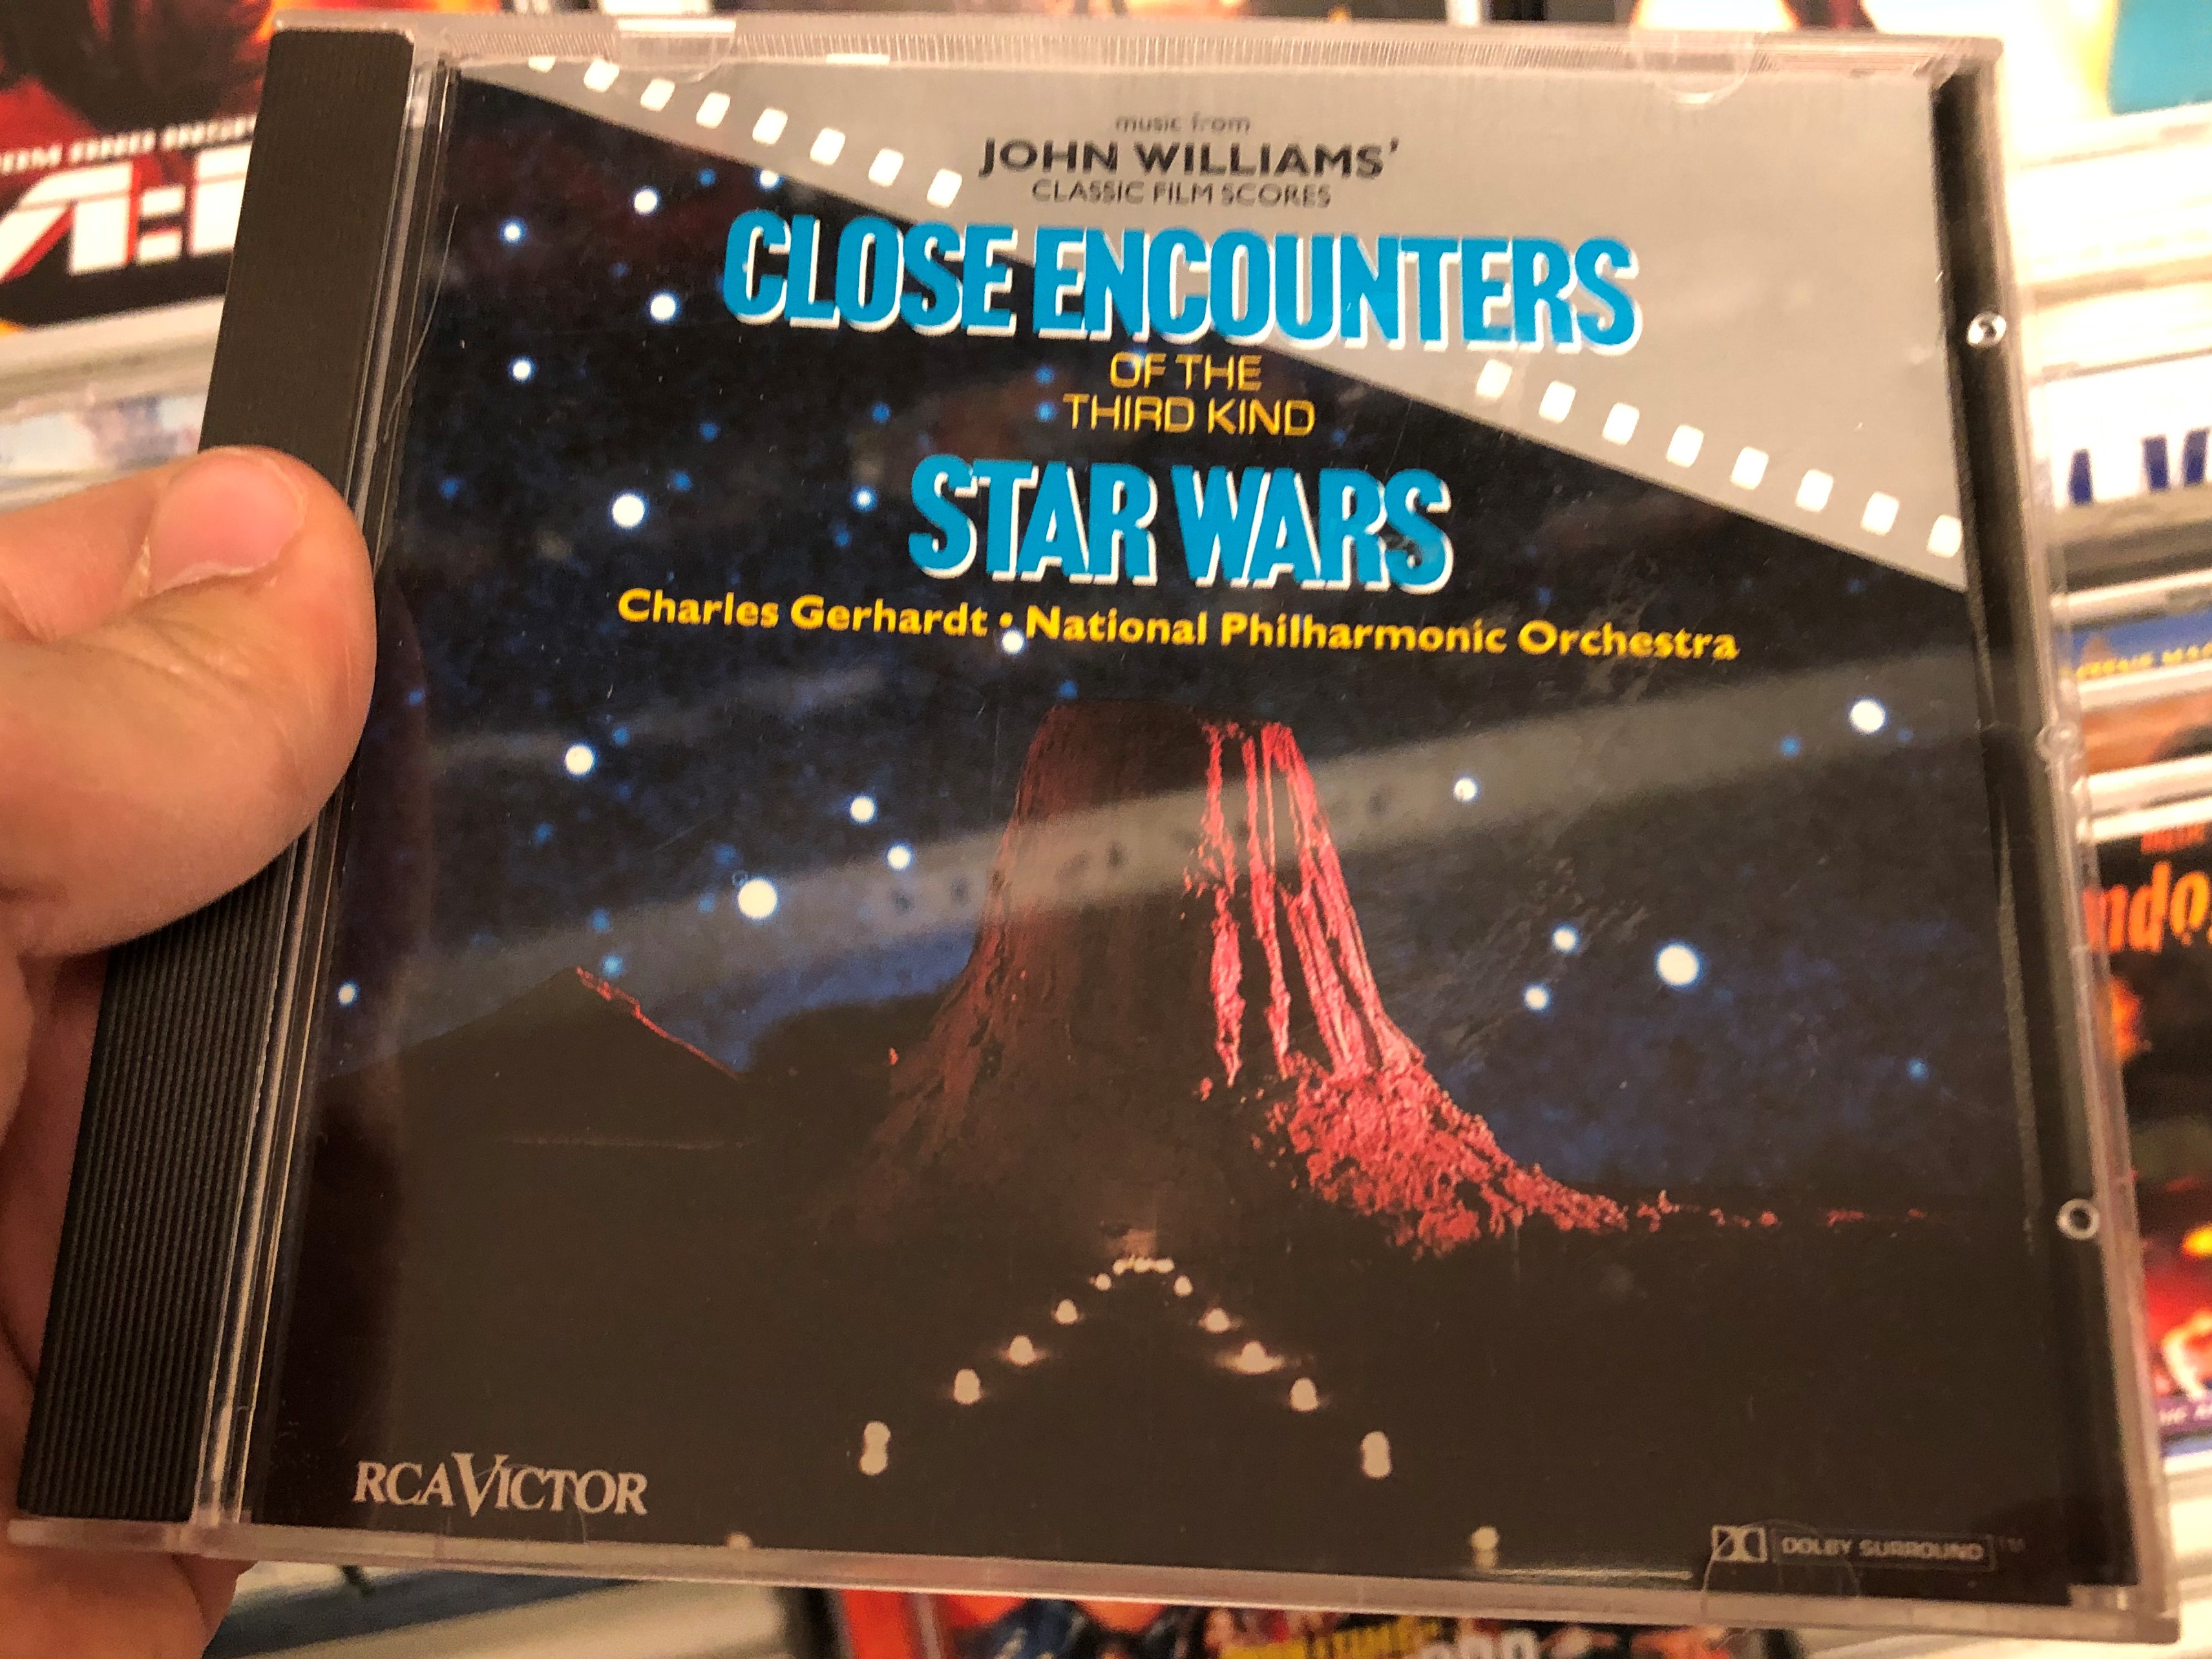 john-williams-close-encounters-of-the-third-kind-and-star-wars-charles-gerhardt-national-philharmonic-orchestra-rca-victor-audio-cd-gd82698-1-.jpg